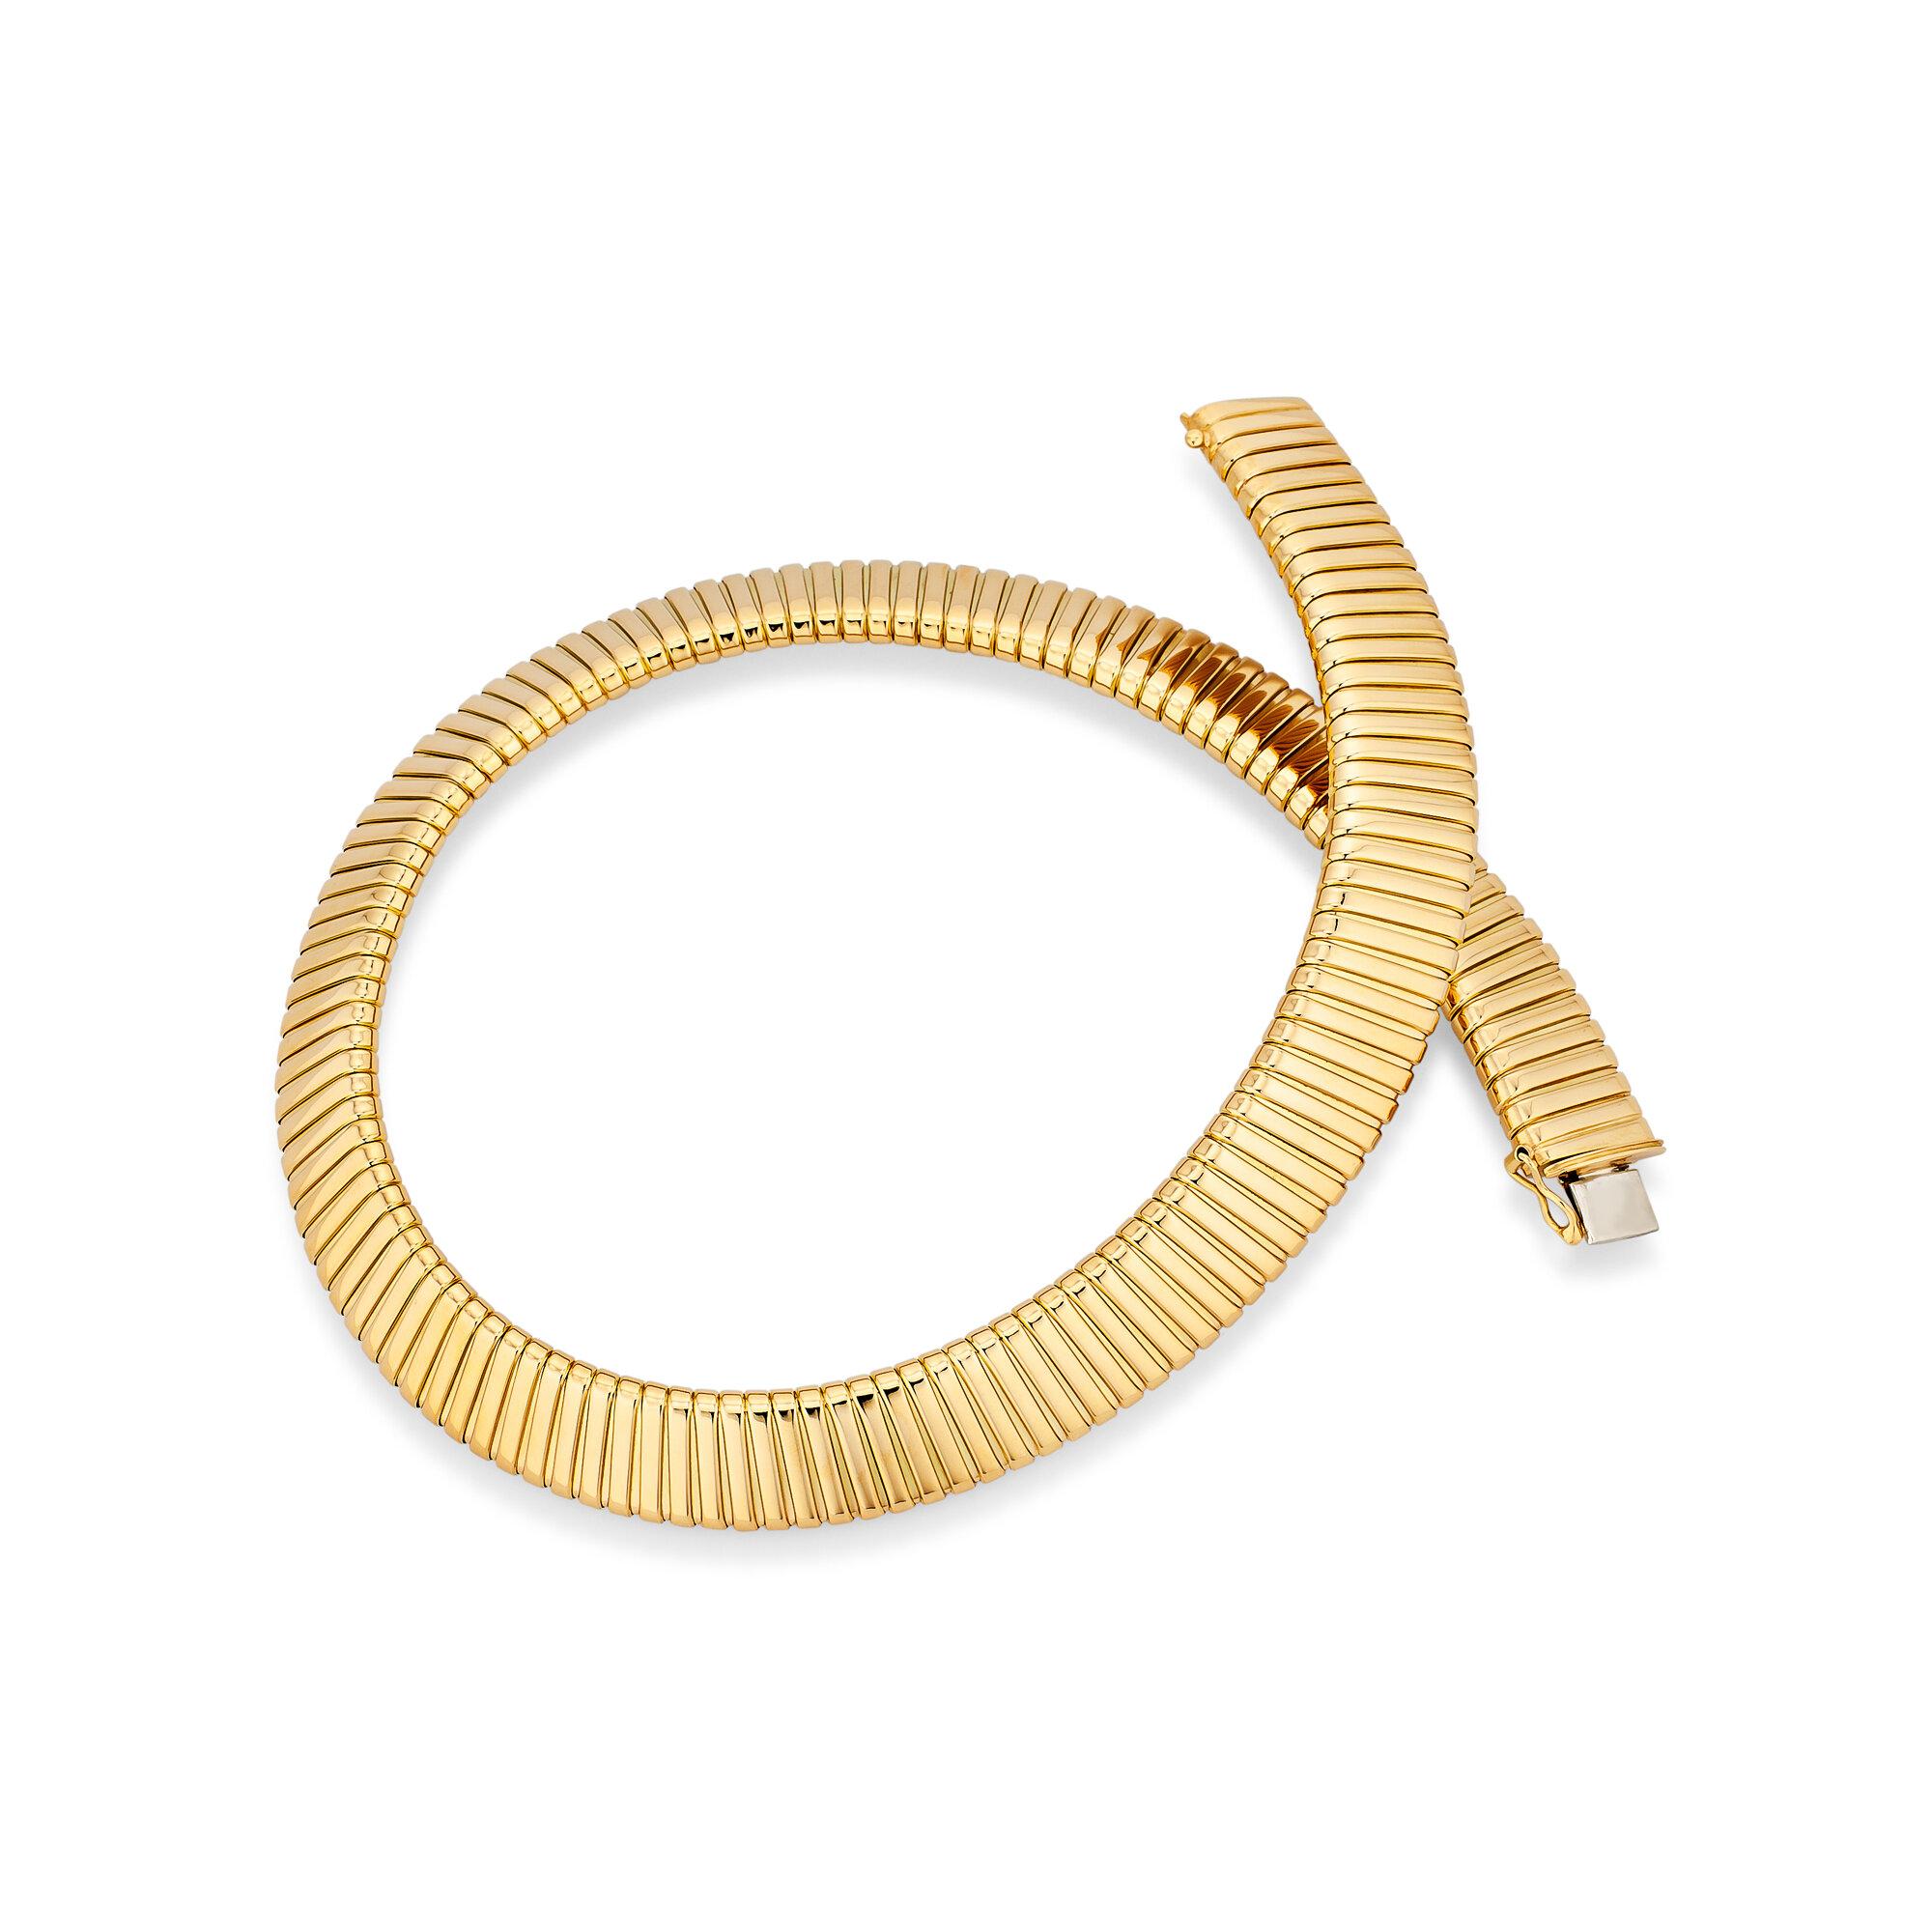 When only just the right amount of gold will do, this clean, sleek, and timeless Bulgari handmade tubogas necklace will fit the bill.  With a striking yet minimalist presence, this vintage 18 karat yellow gold necklace will quickly become your go-to